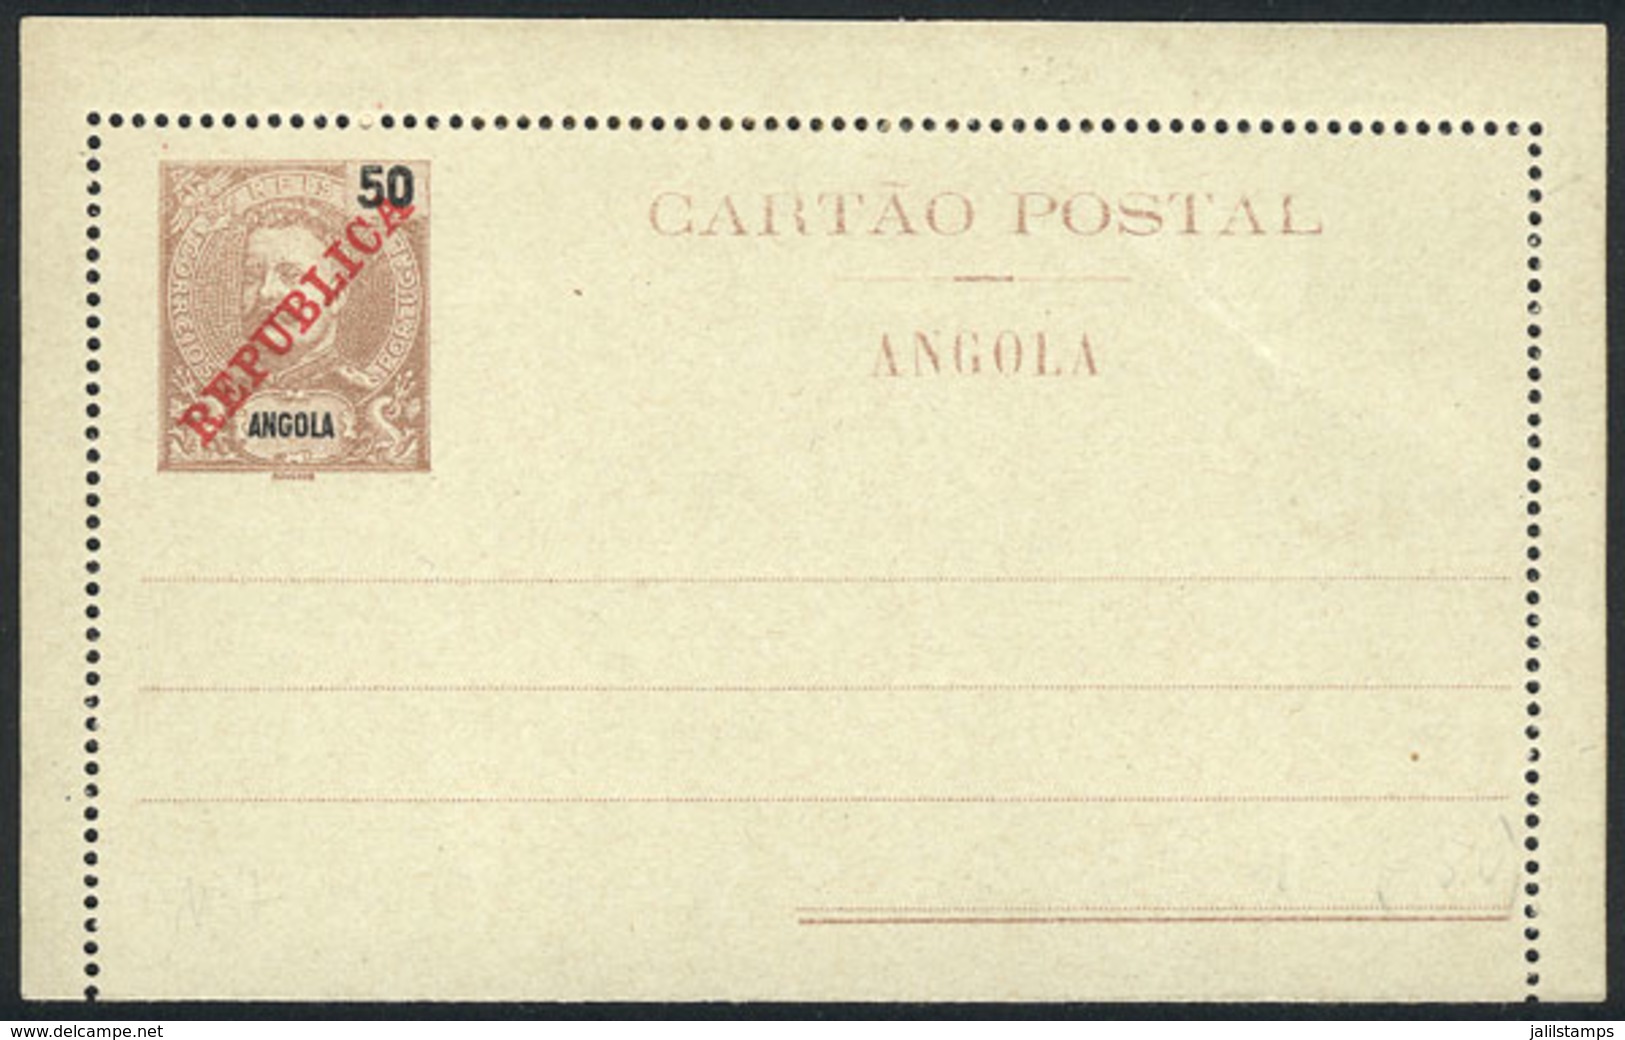 ANGOLA: 50Rs. Lettercard With "REPUBLICA" Overprint, Unused, Excellent Quality!" - Angola